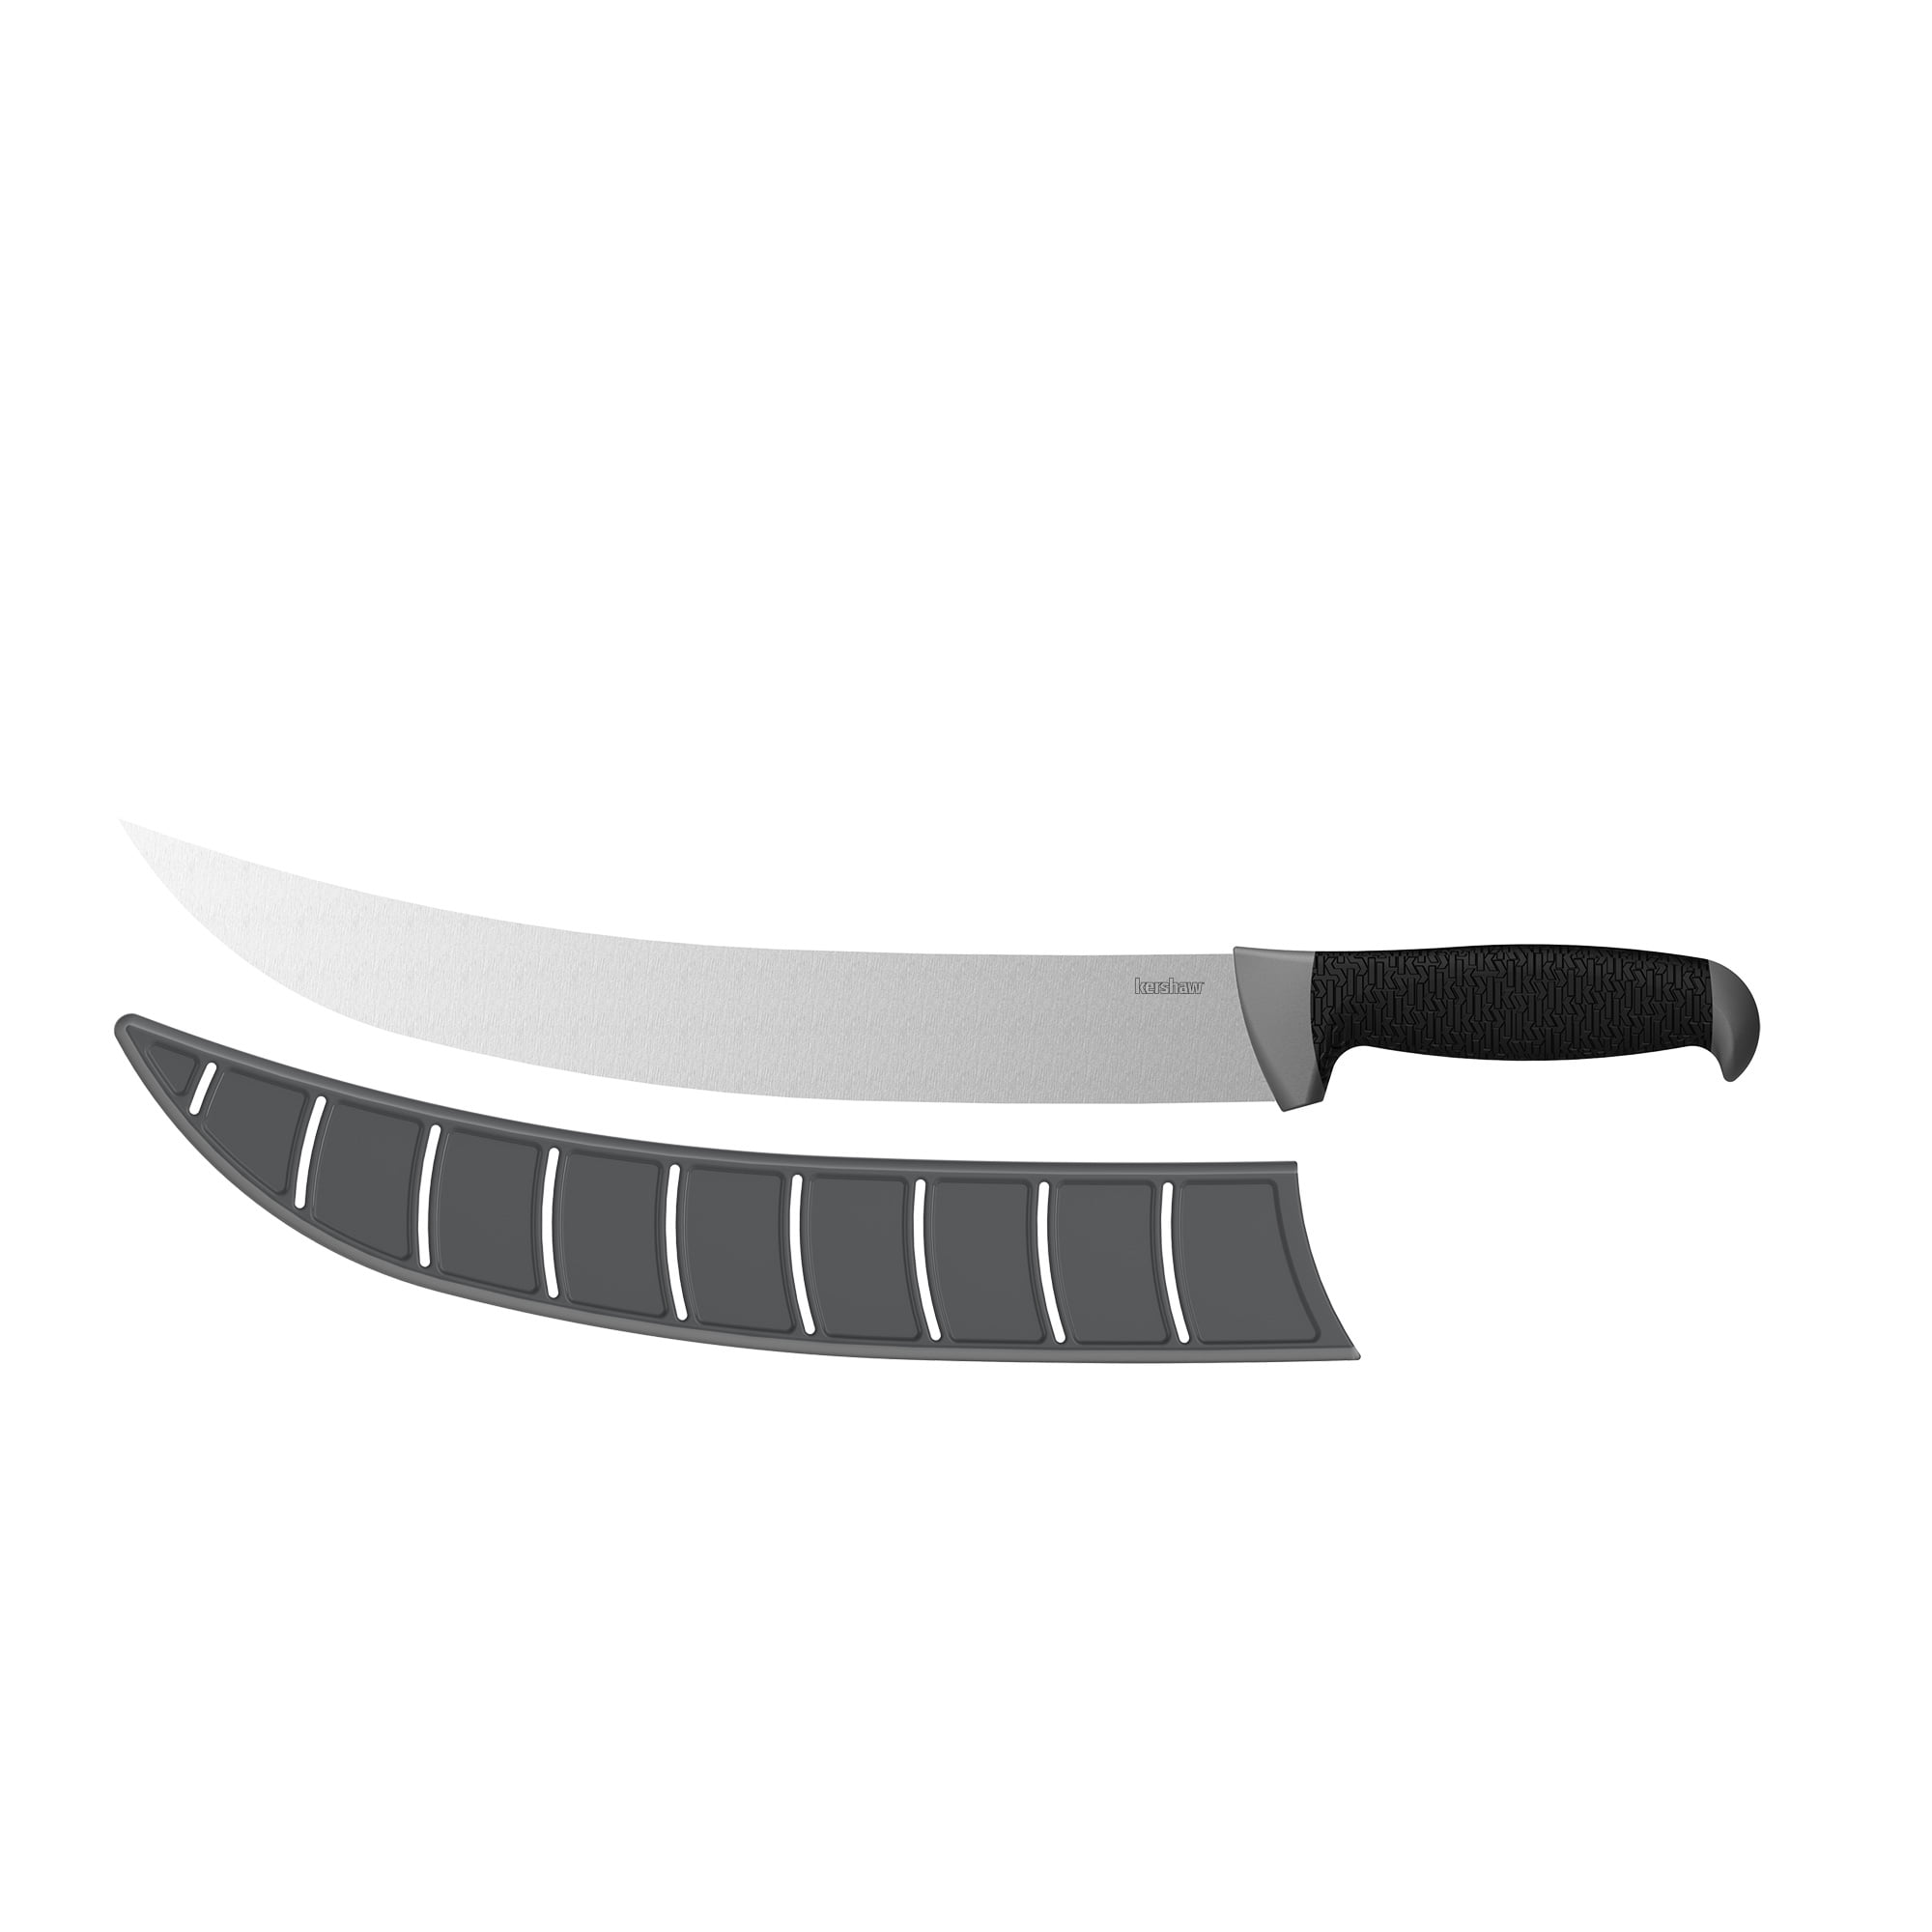 Kershaw Curved Fish Fillet Knife with Protective Sheath, 12” Blade 